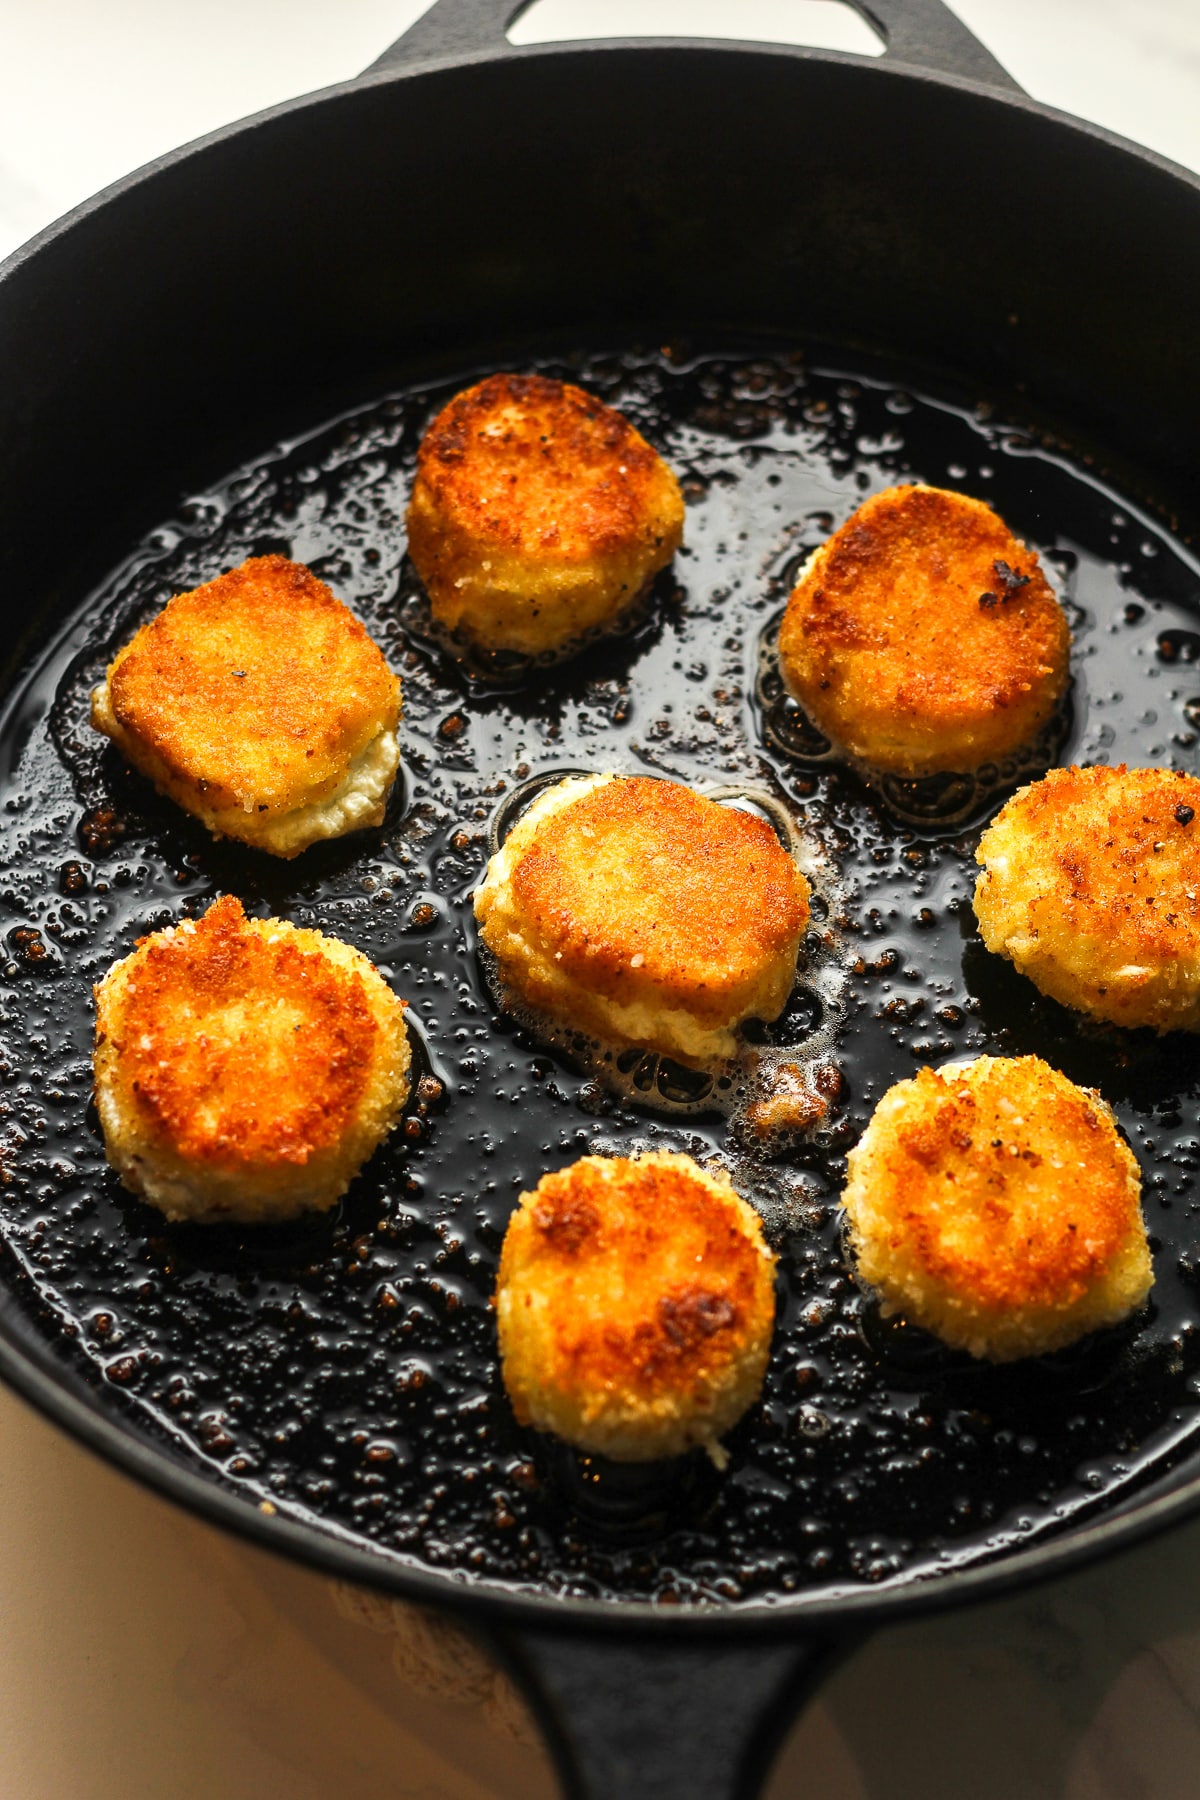 A skillet of eight rounds of fried goat cheese.